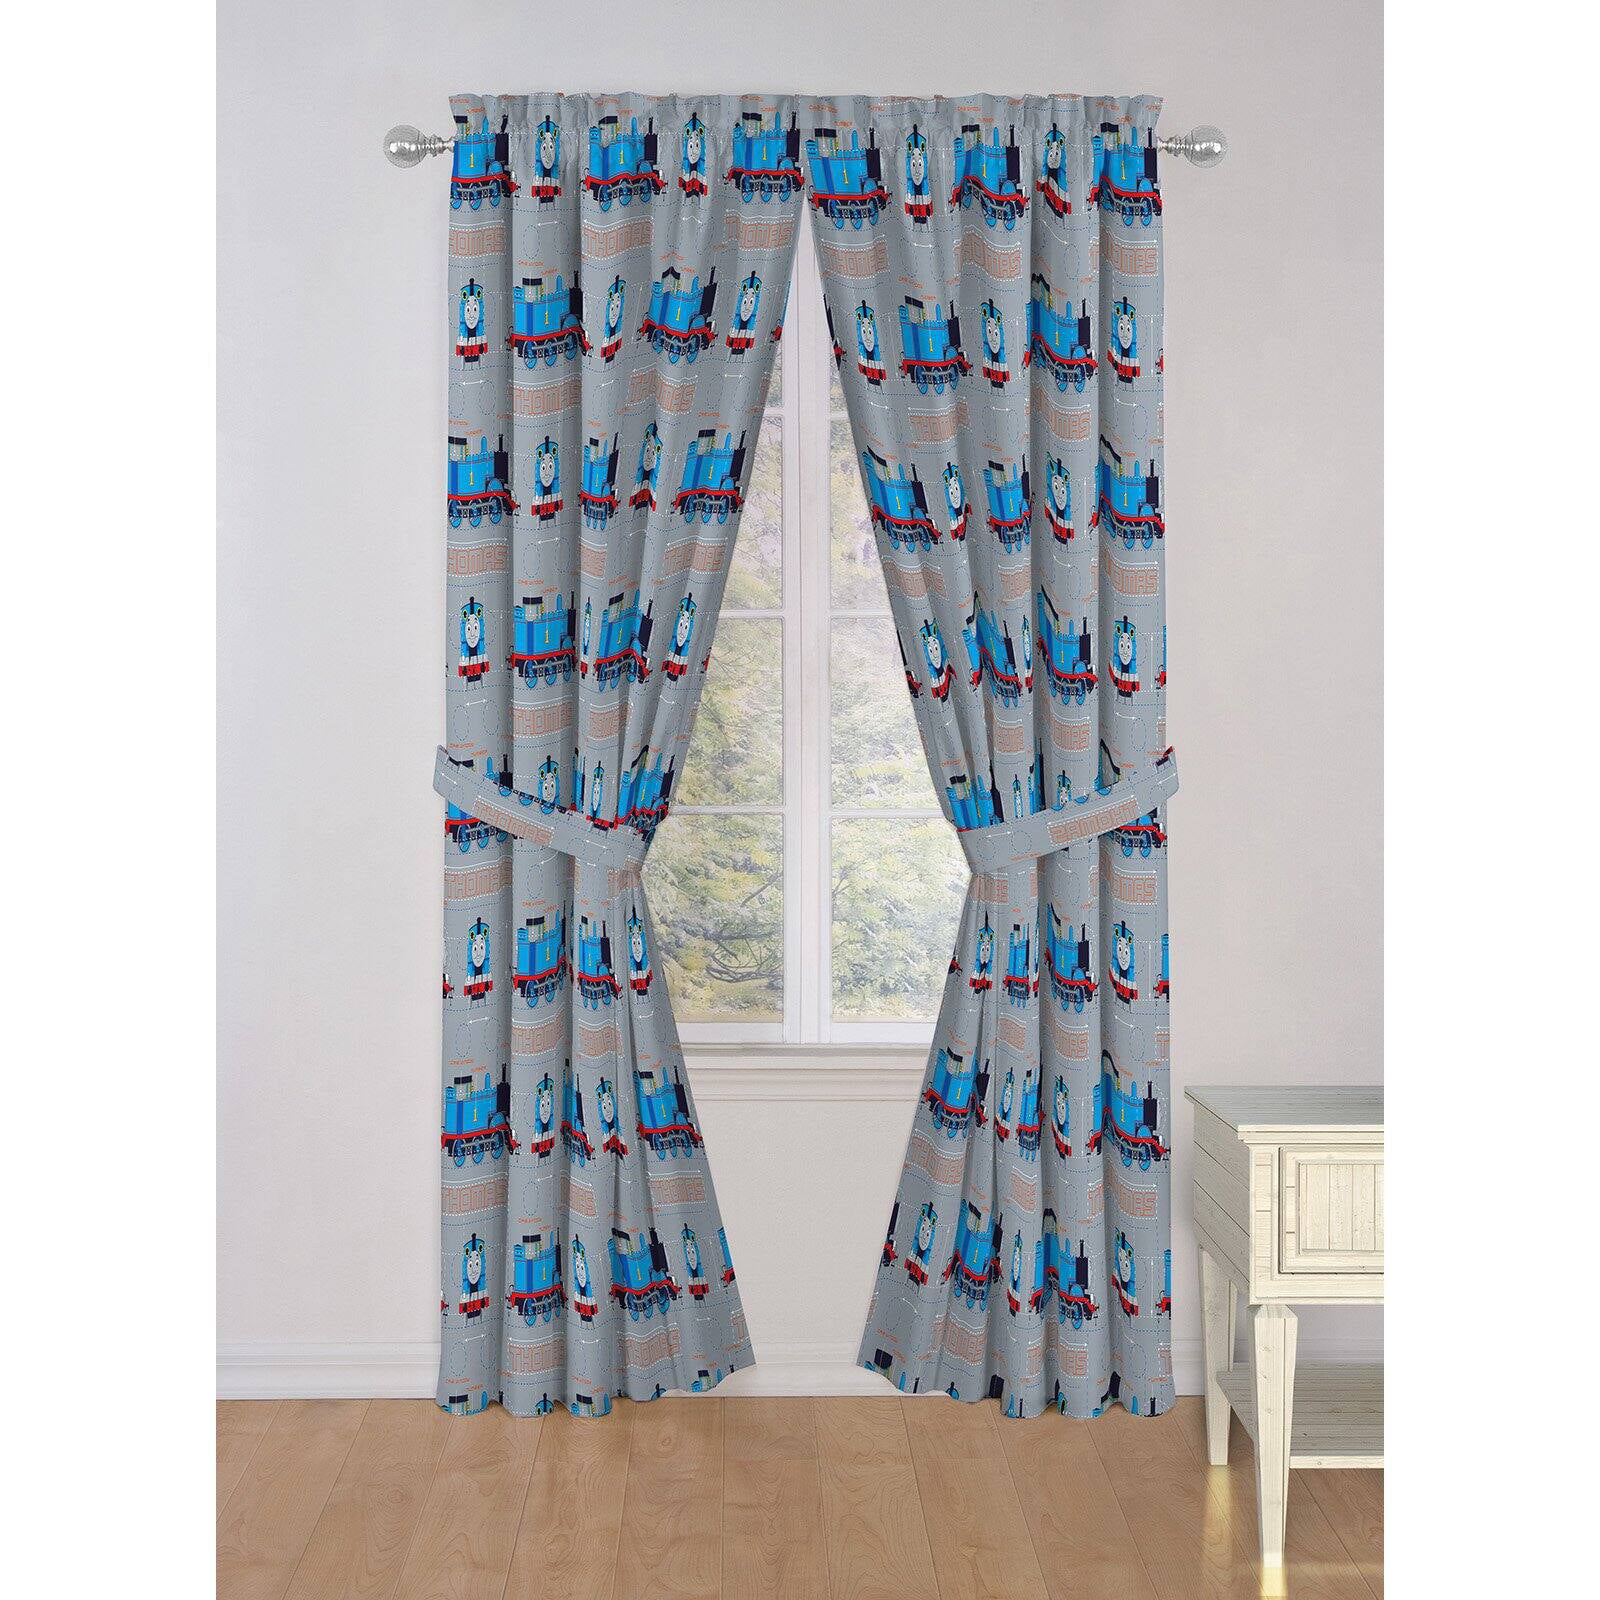 SHOP Thomas The Tank Engine Range Of Curtains Cushion Covers And Lamp Shades 